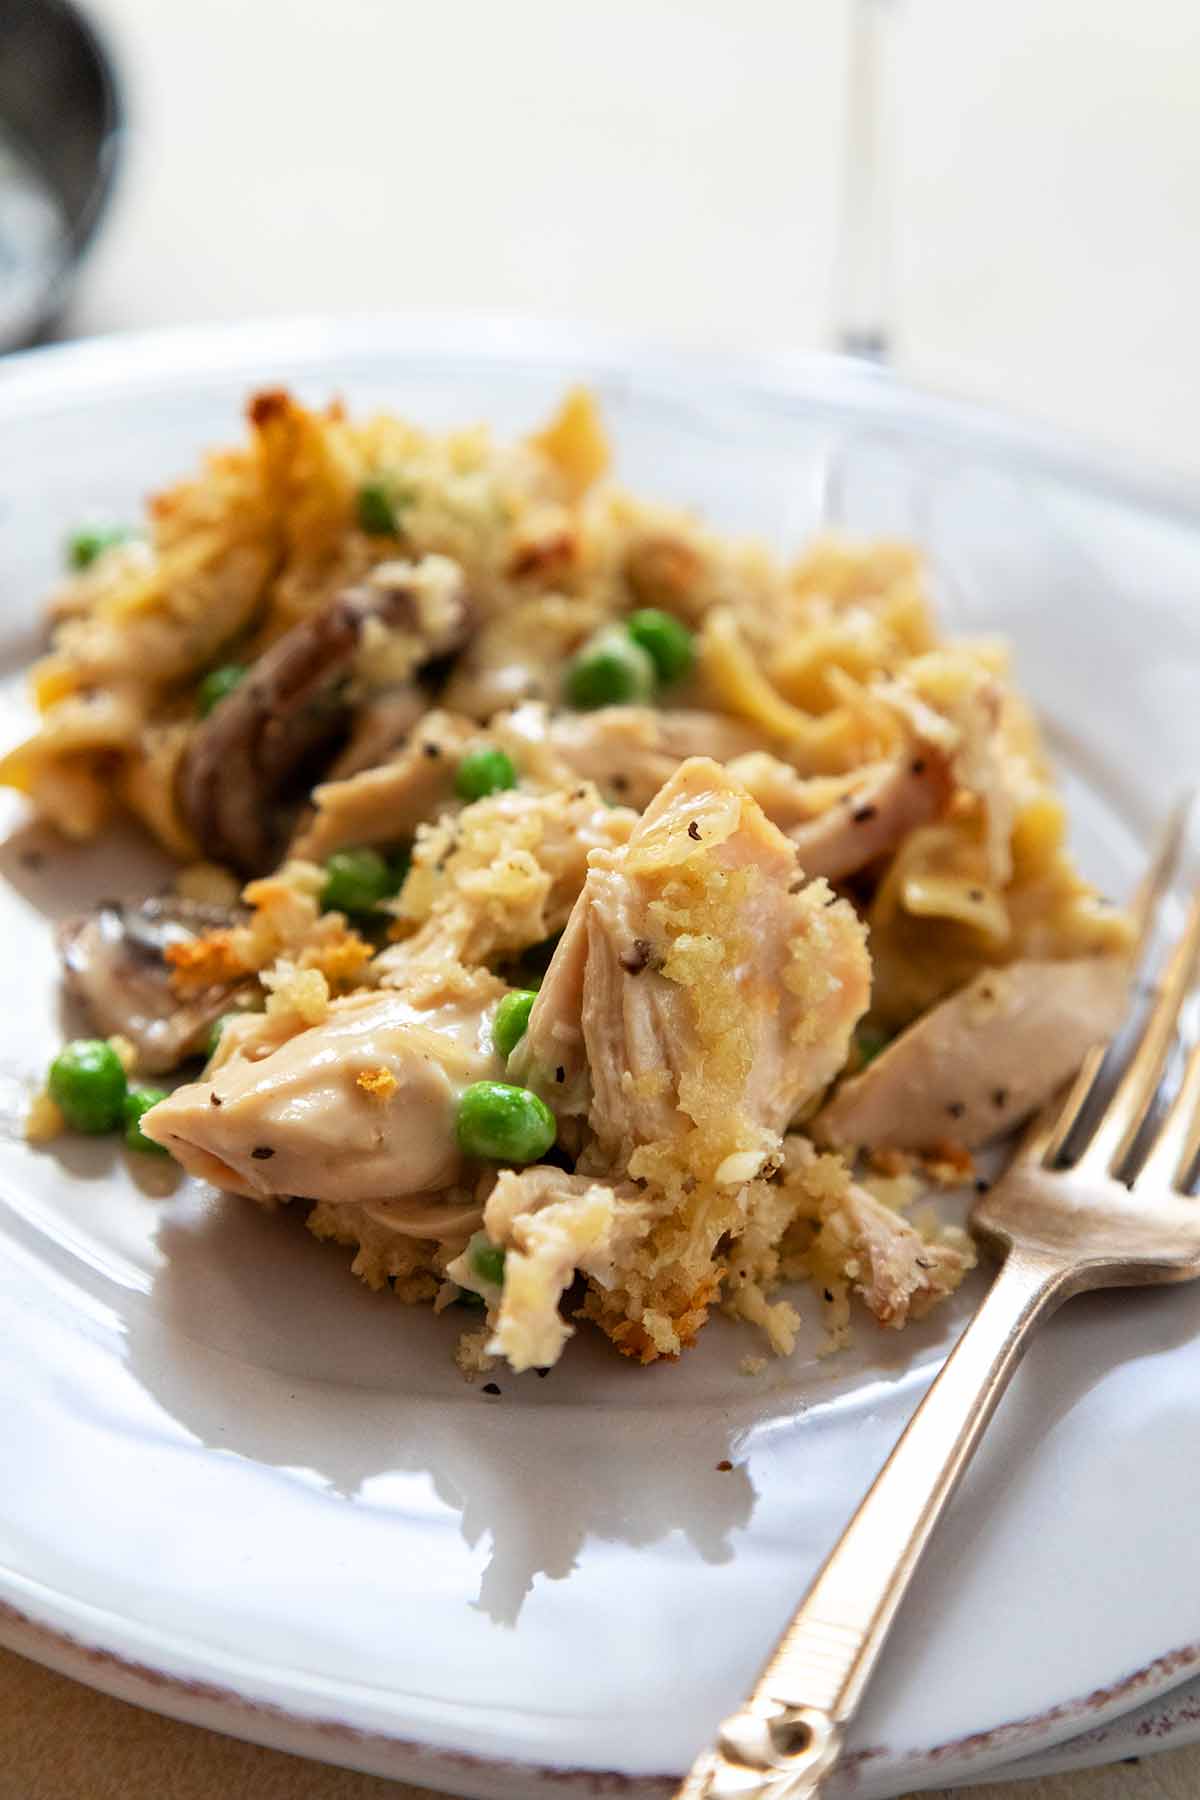 A portion of turkey tetrazzini on a plate with a fork next to it.